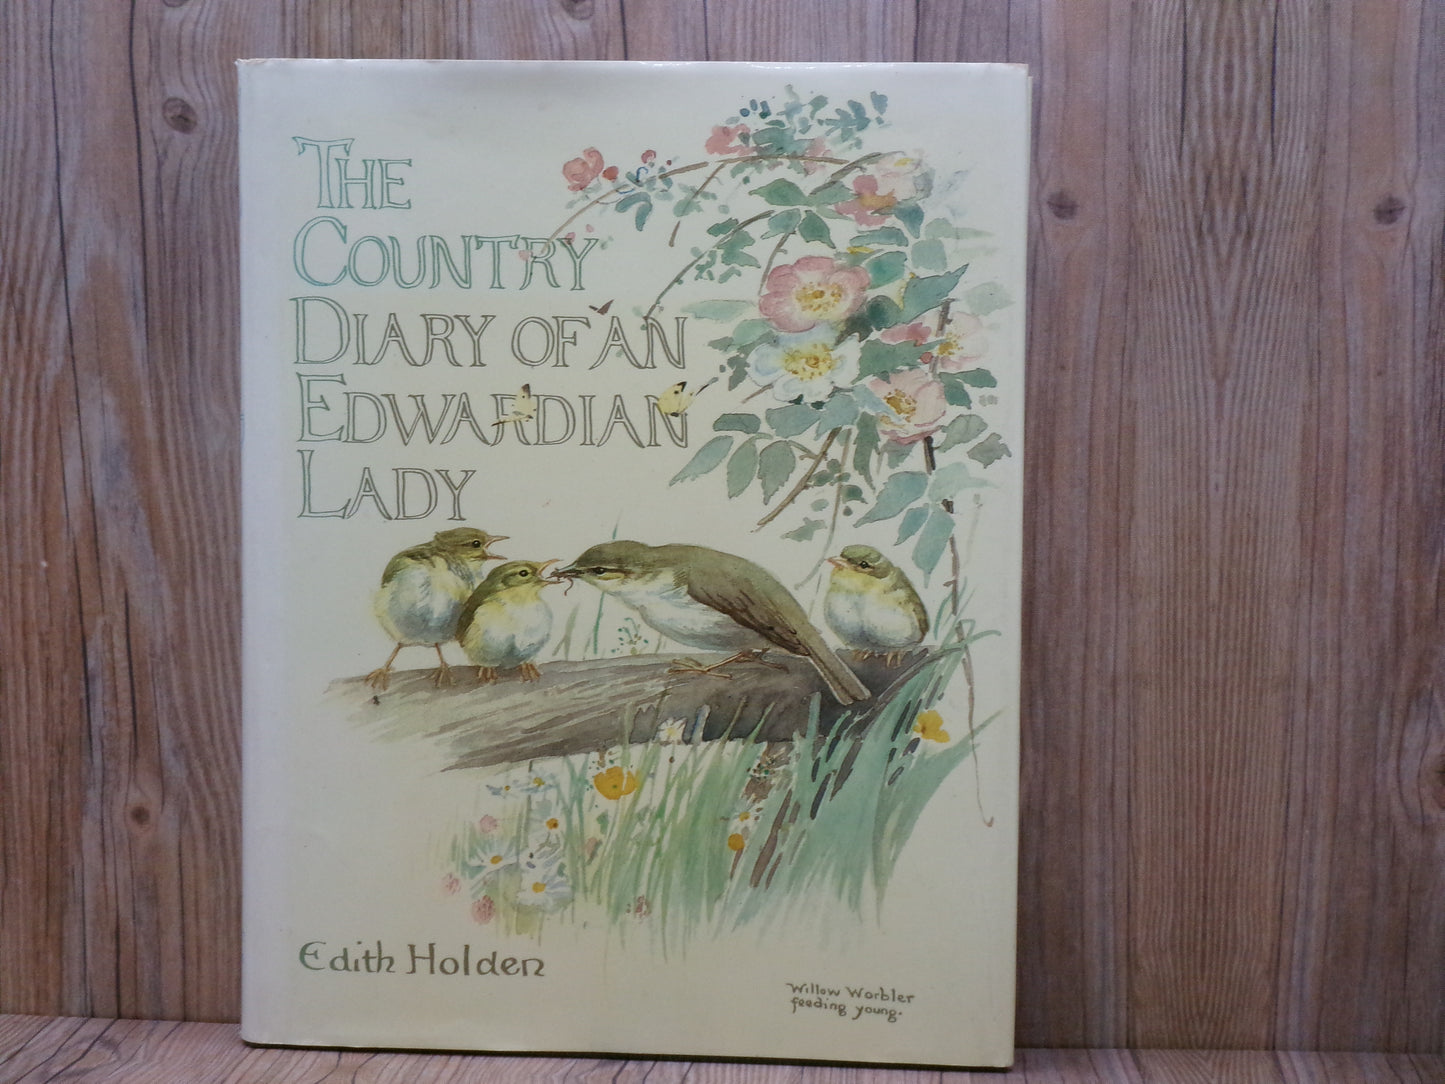 The Country Diary Of An Edwardian Lady by Edith Holden